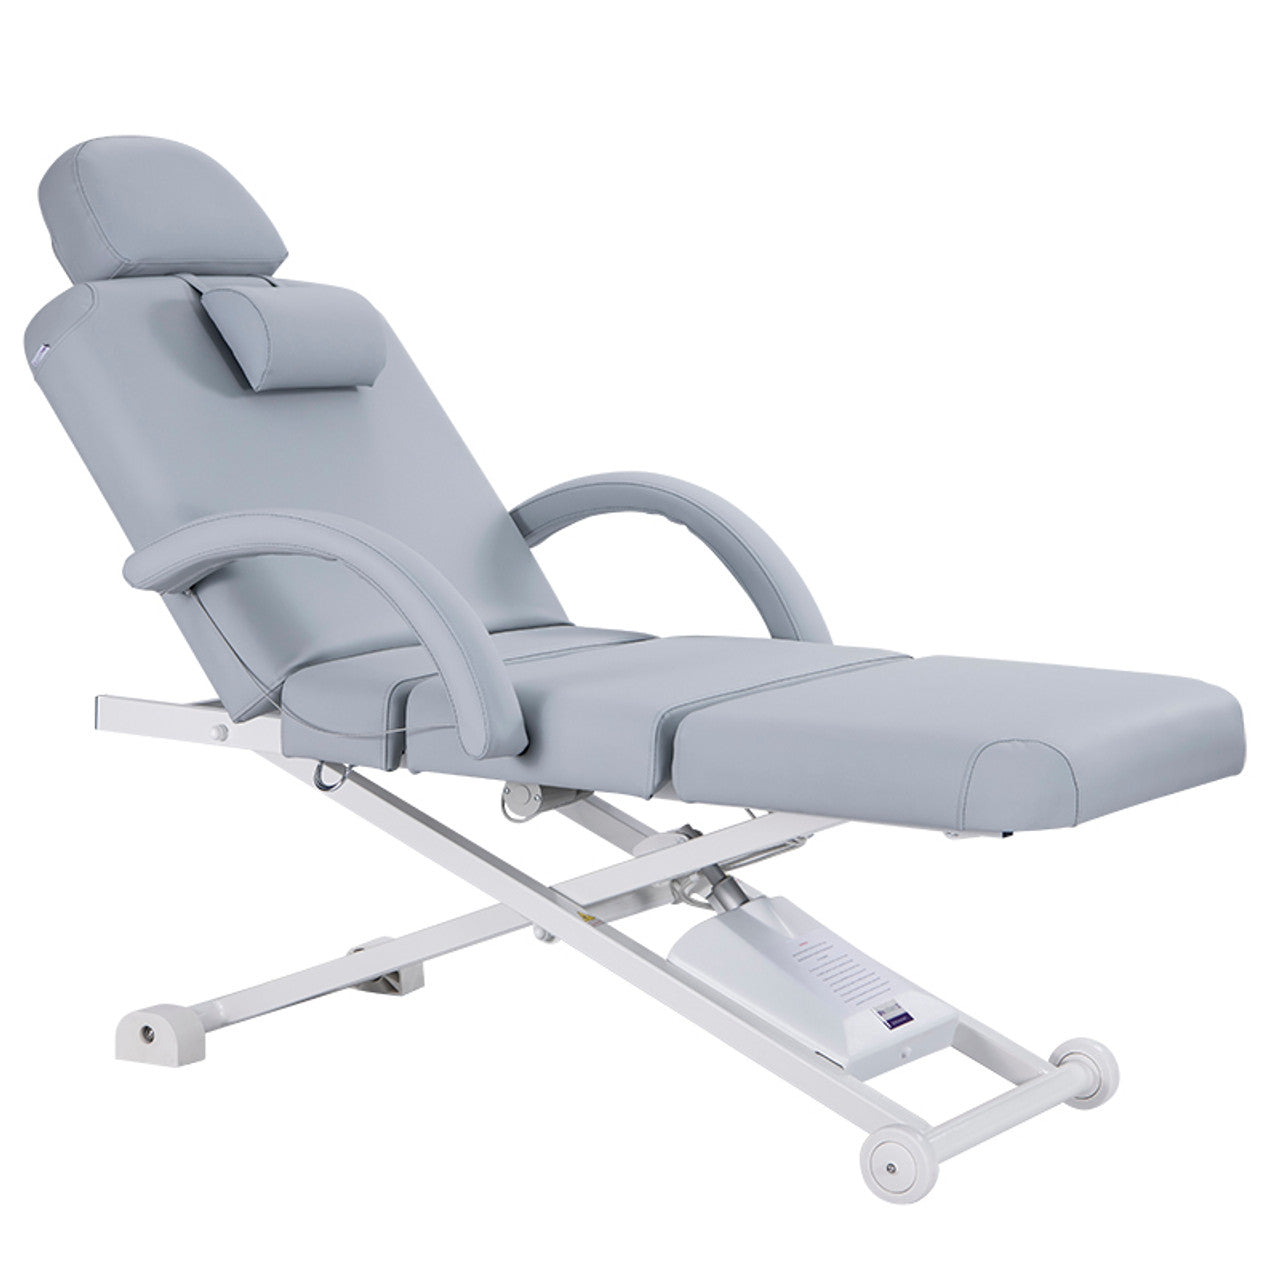 SpaMarc . Cagney . 3 Motor Massage Table . ADA Compliant (STB)